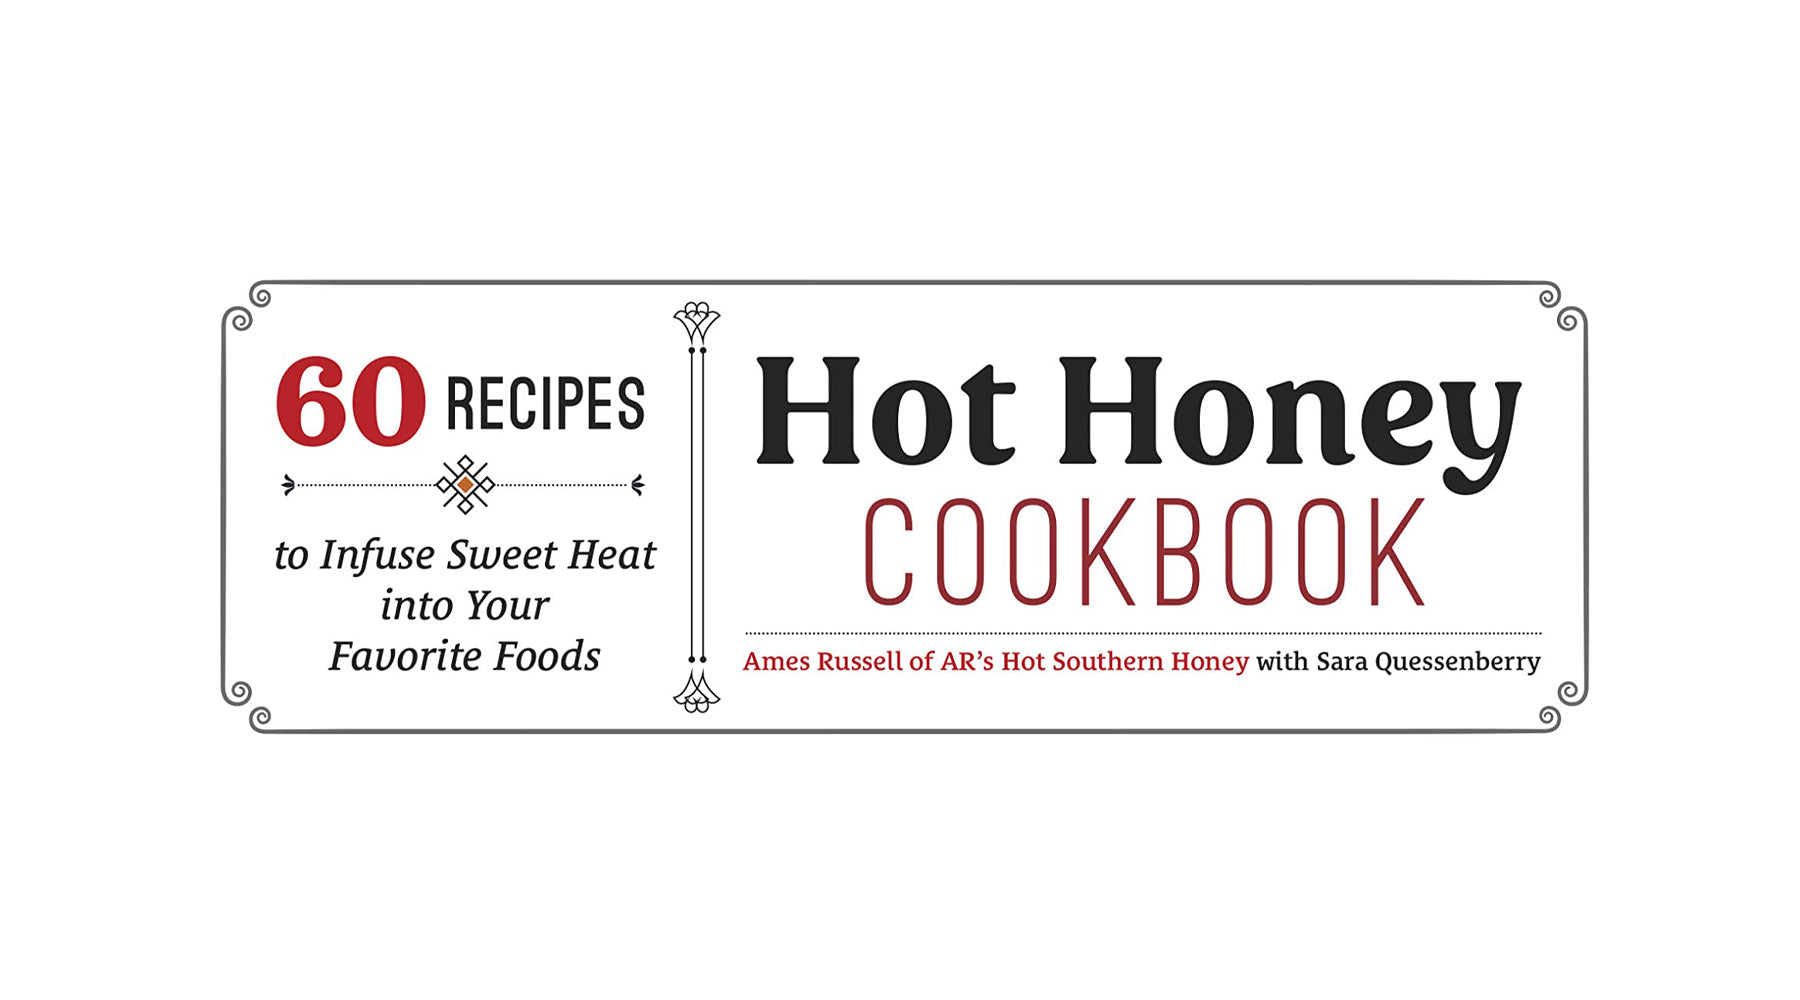 Cook the Book: The Hot Honey Cookbook